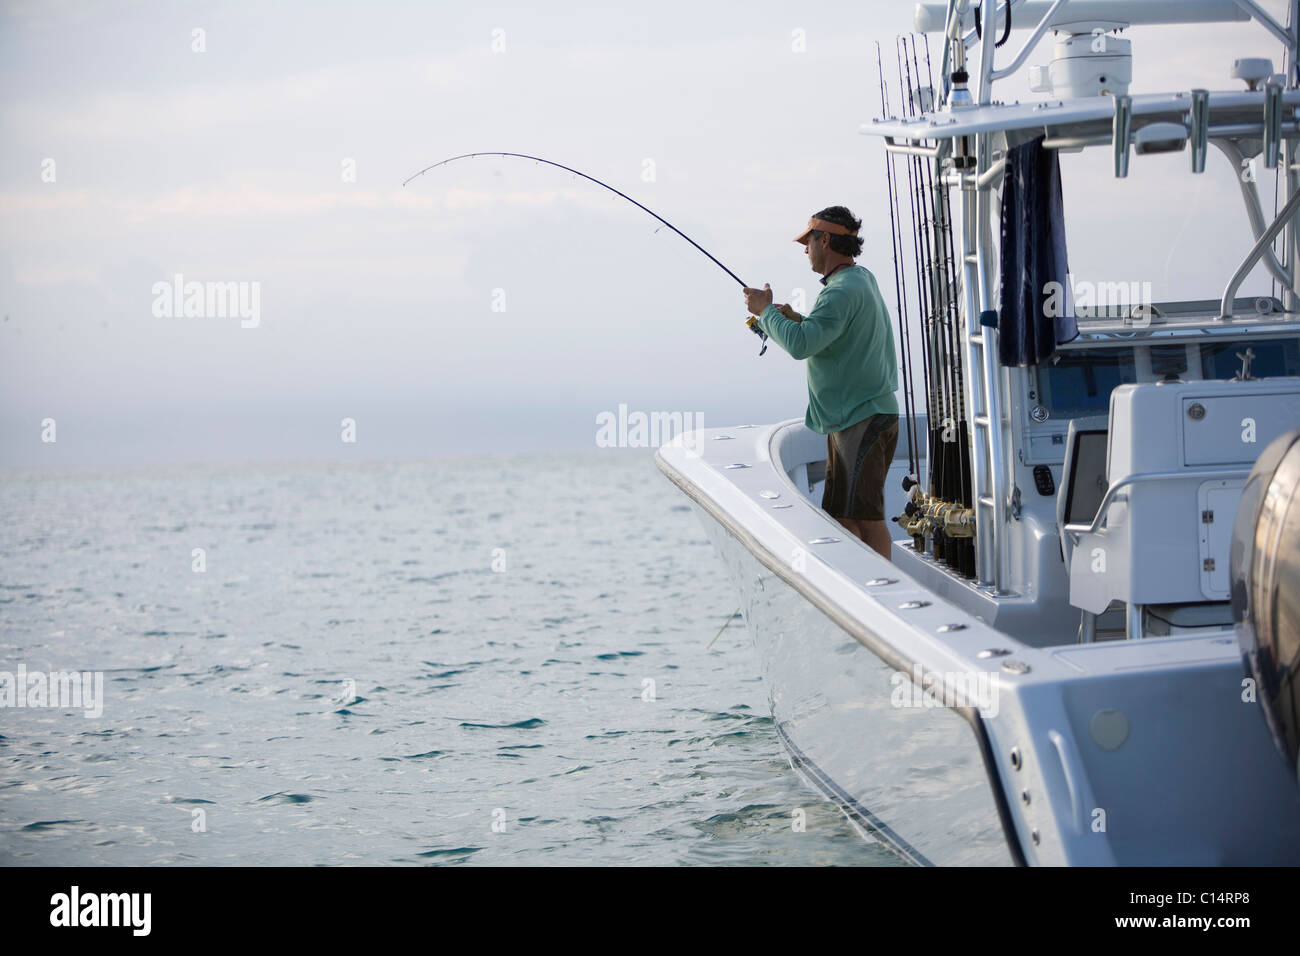 A fisherman reels in a catch off the side of his boat. Stock Photo